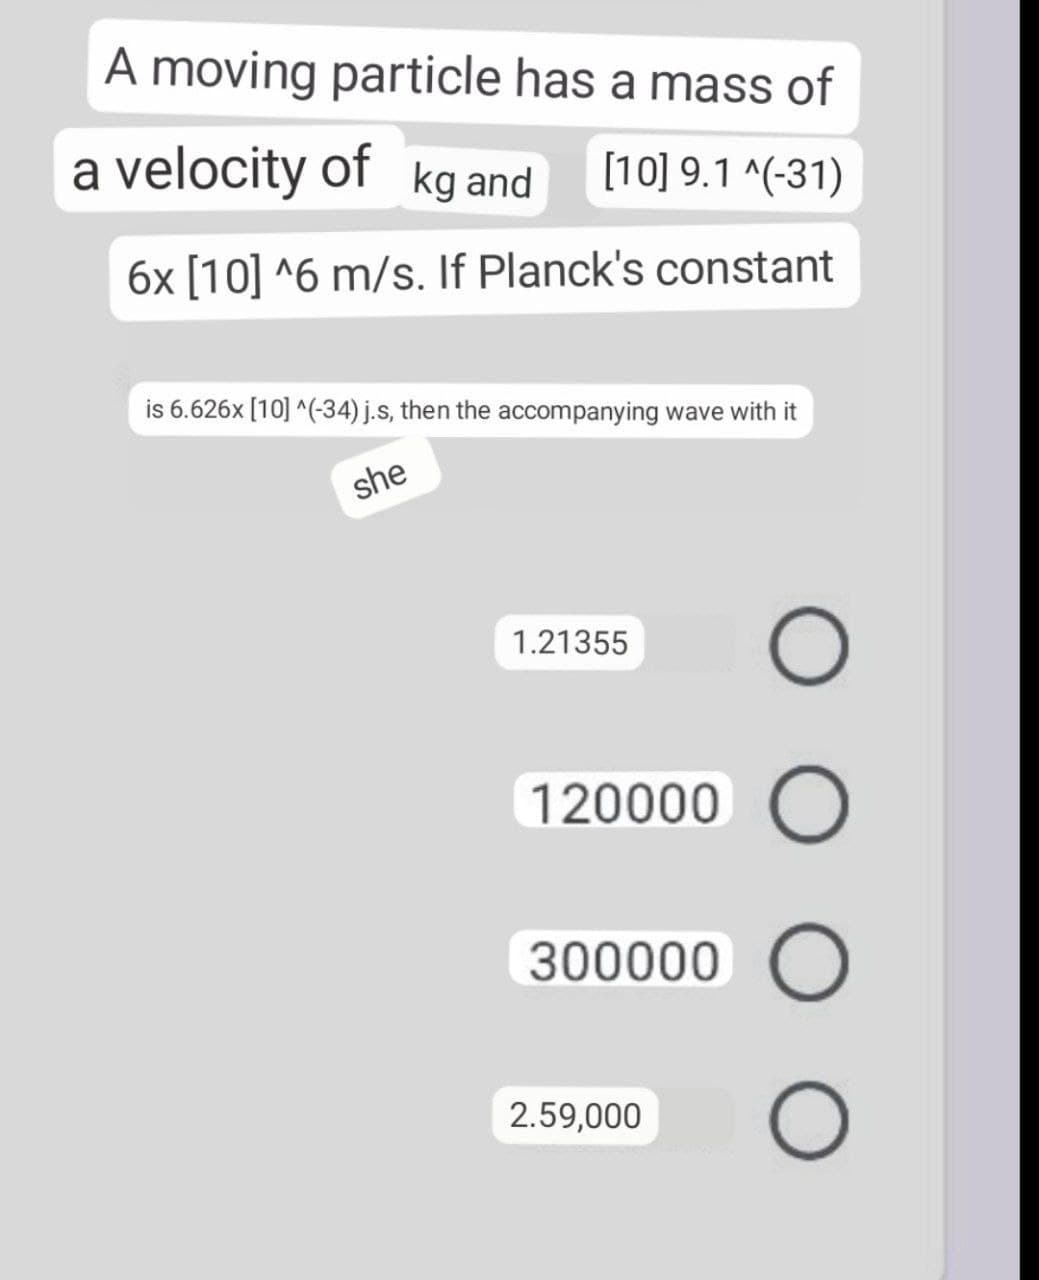 A moving particle has a mass of
a velocity of kg and
[10] 9.1 ^(-31)
6x [10] ^6 m/s. If Planck's constant
is 6.626x [10] ^(-34) j.s, then the accompanying wave with it
she
1.21355
120000 O
300000 O
2.59,000
